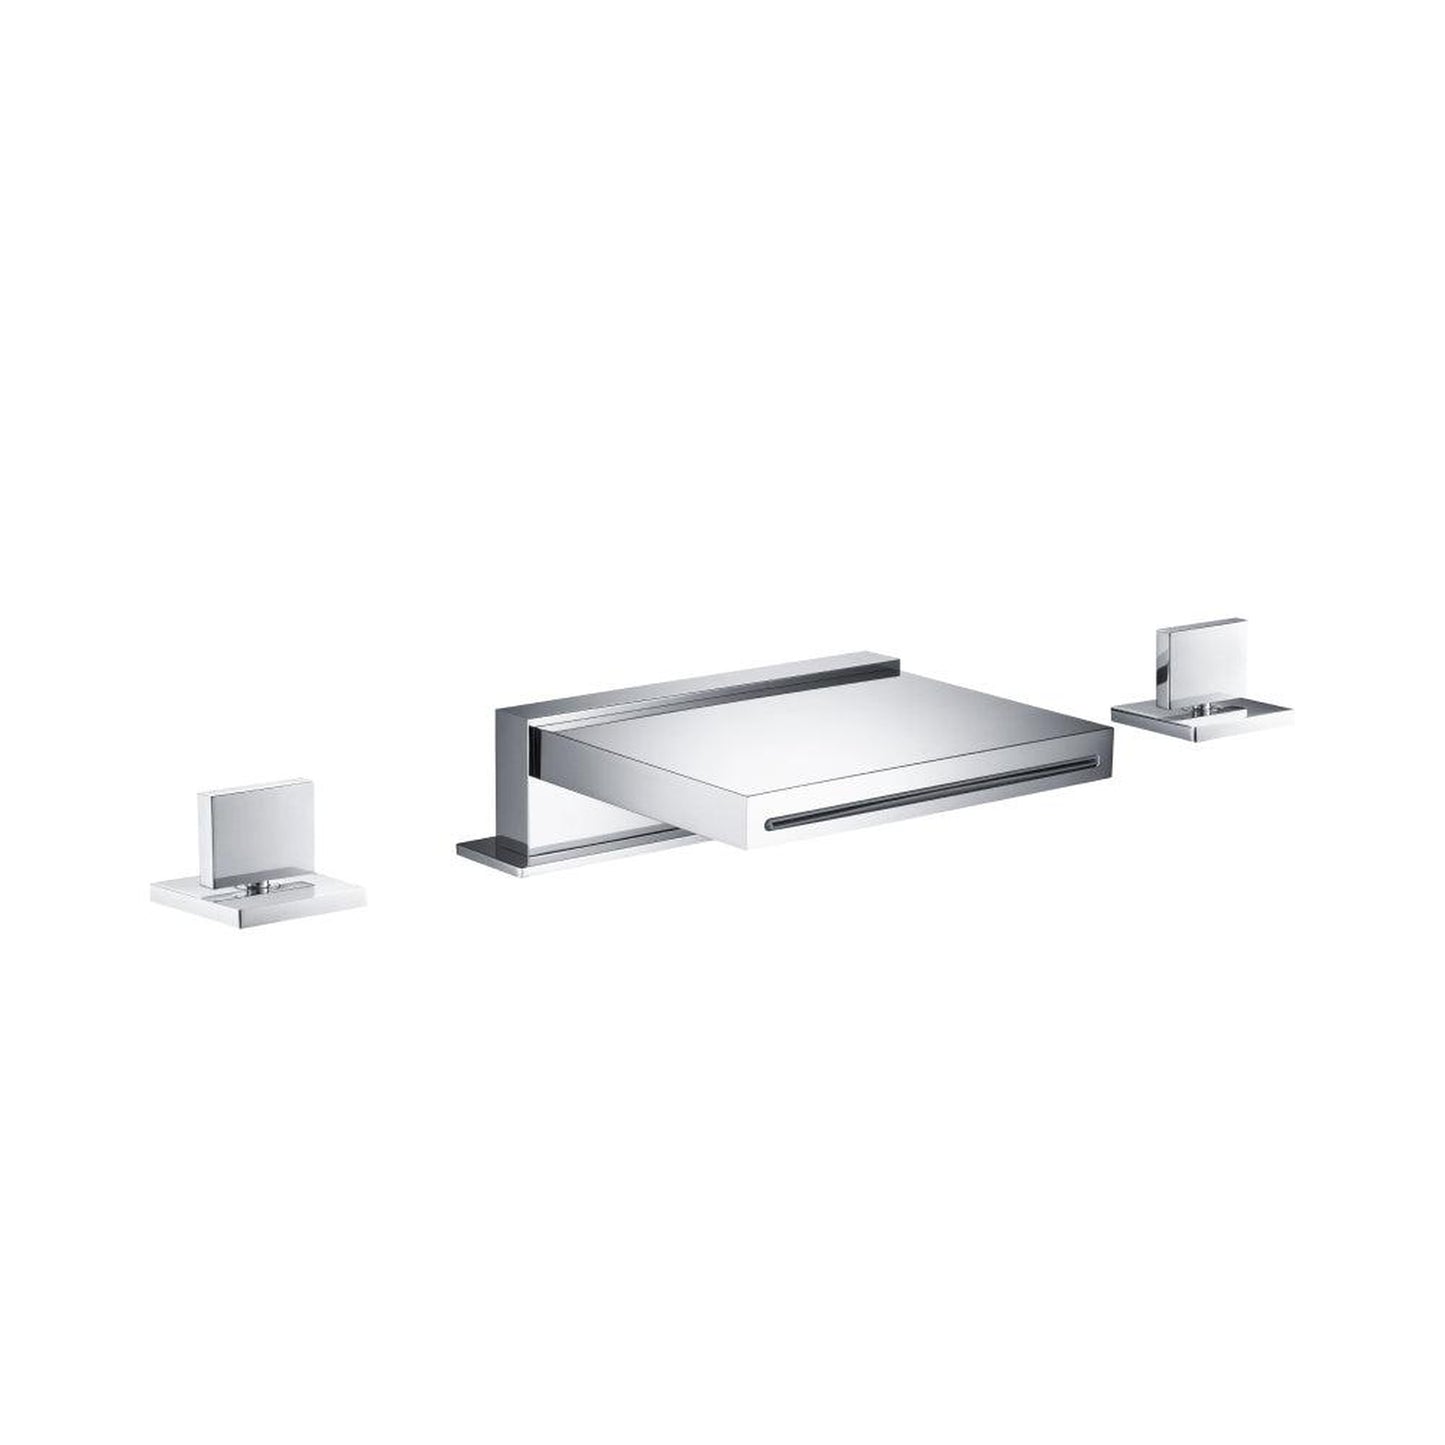 Isenberg Serie 160 13" Three-Hole Brushed Nickel PVD Deck-Mounted Cascade / Sheet Flow Waterfall Roman Bathtub Faucet With Valve Set